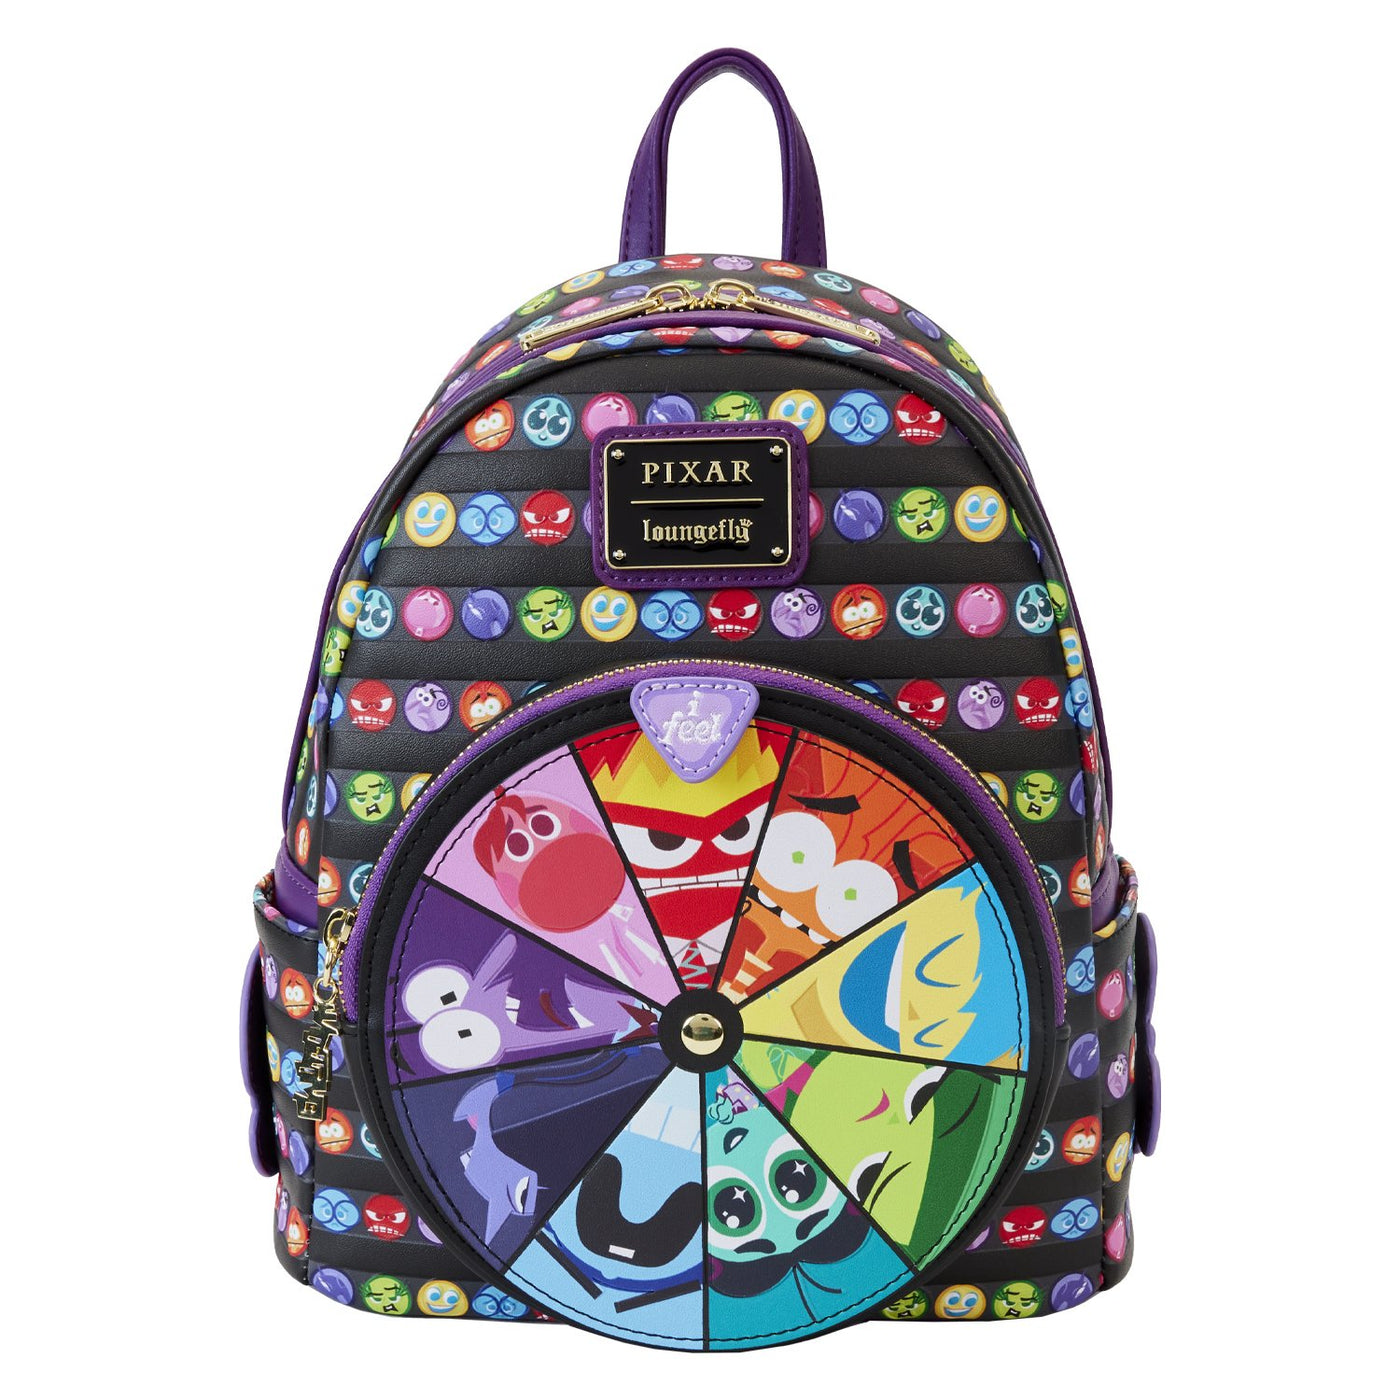 Loungefly Pixar Inside Out 2 Core Memories Mini Backpack - Front Spinning Feature Landing on Anger